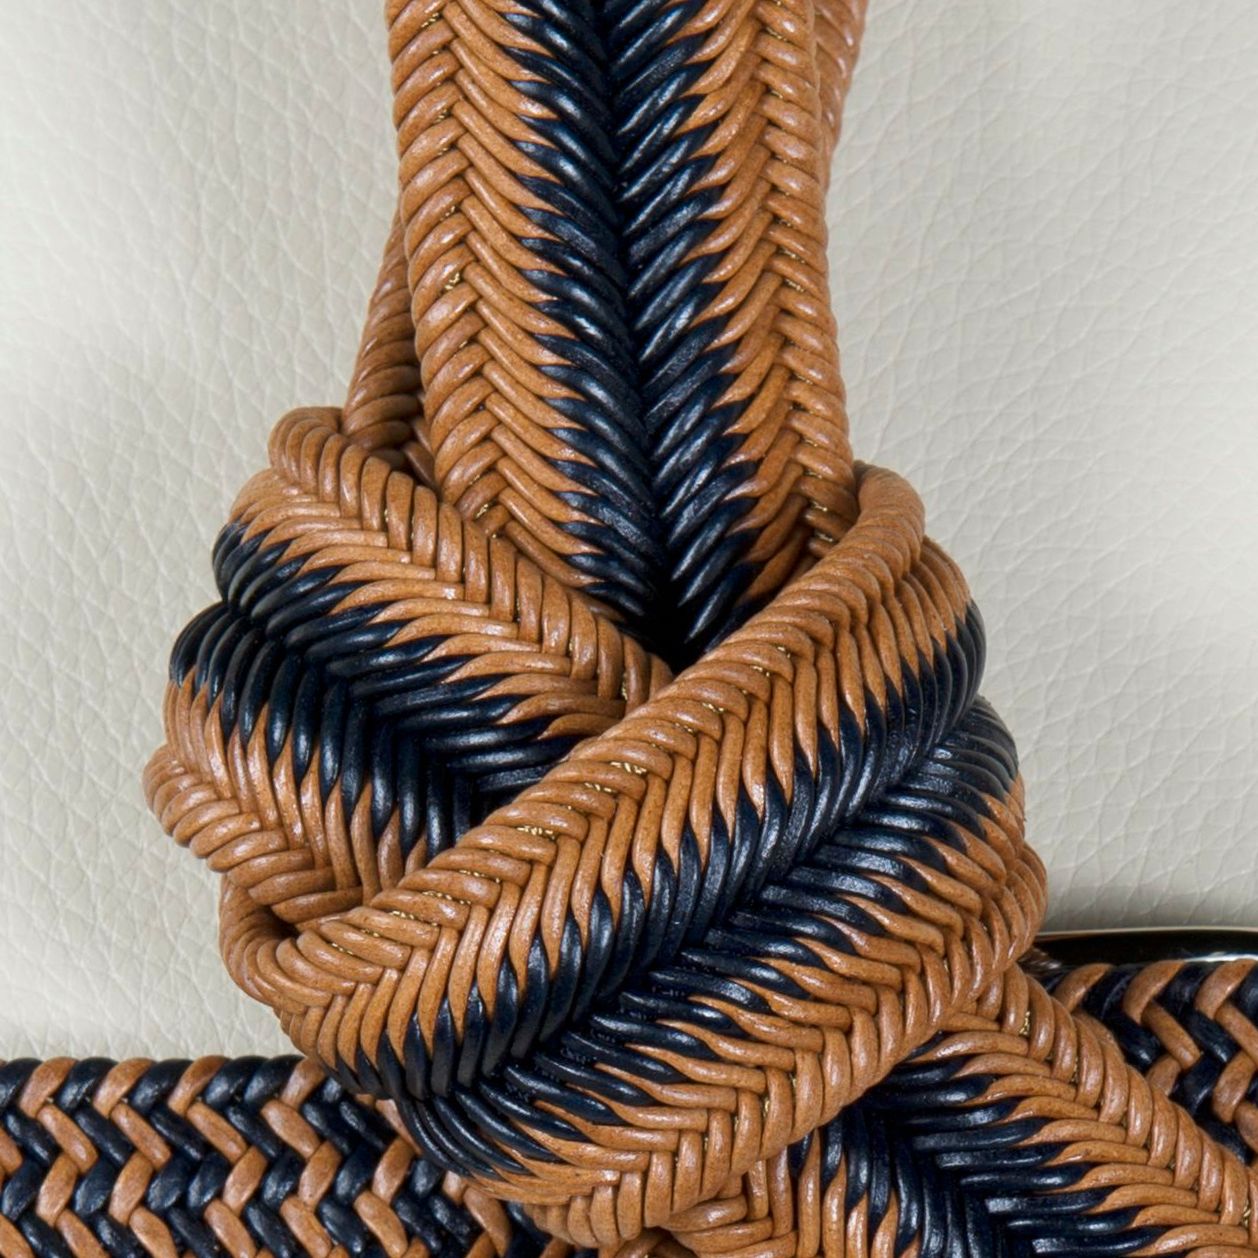 Italian Woven Herringbone Stretch Leather Belt in Saddle and Navy by Torino Leather